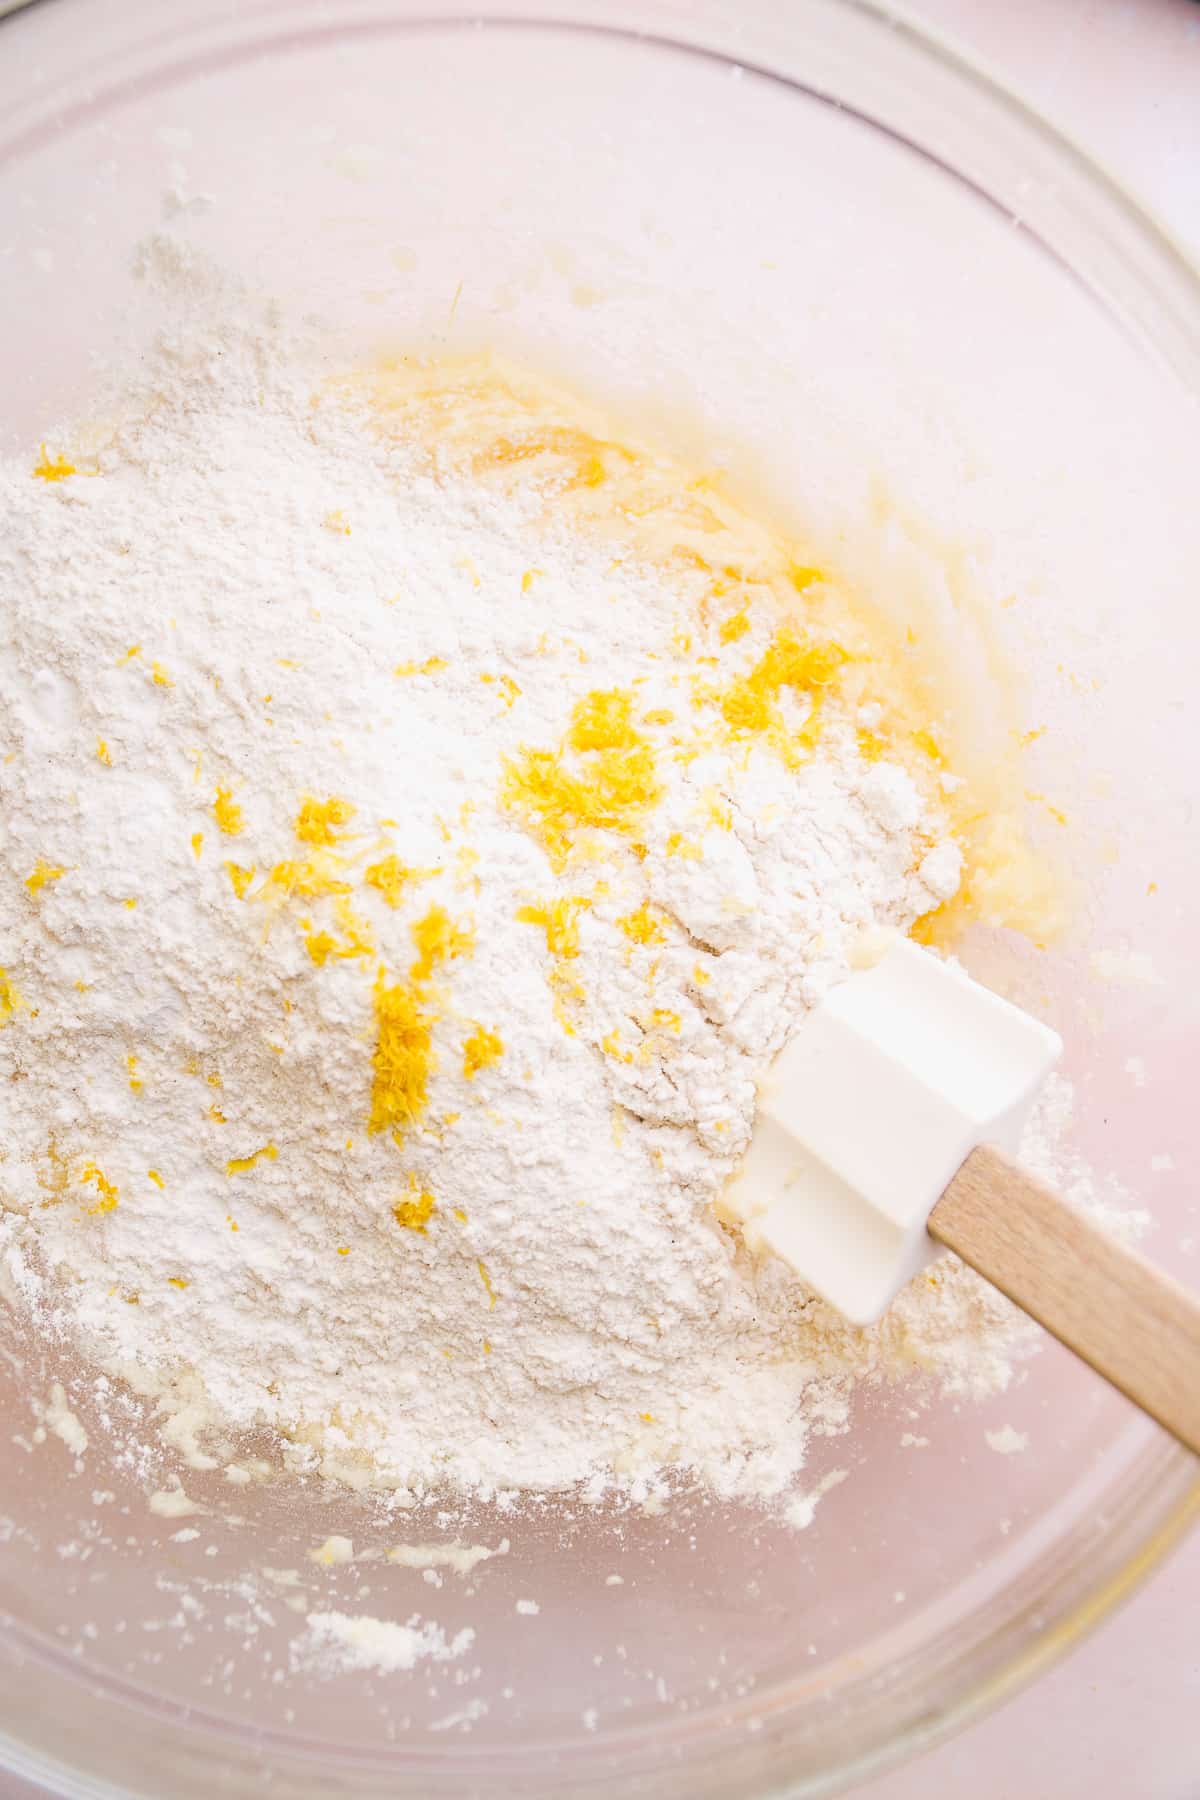 Dry ingredients about to be mixed into a glass bowl with lemon cookie dough.